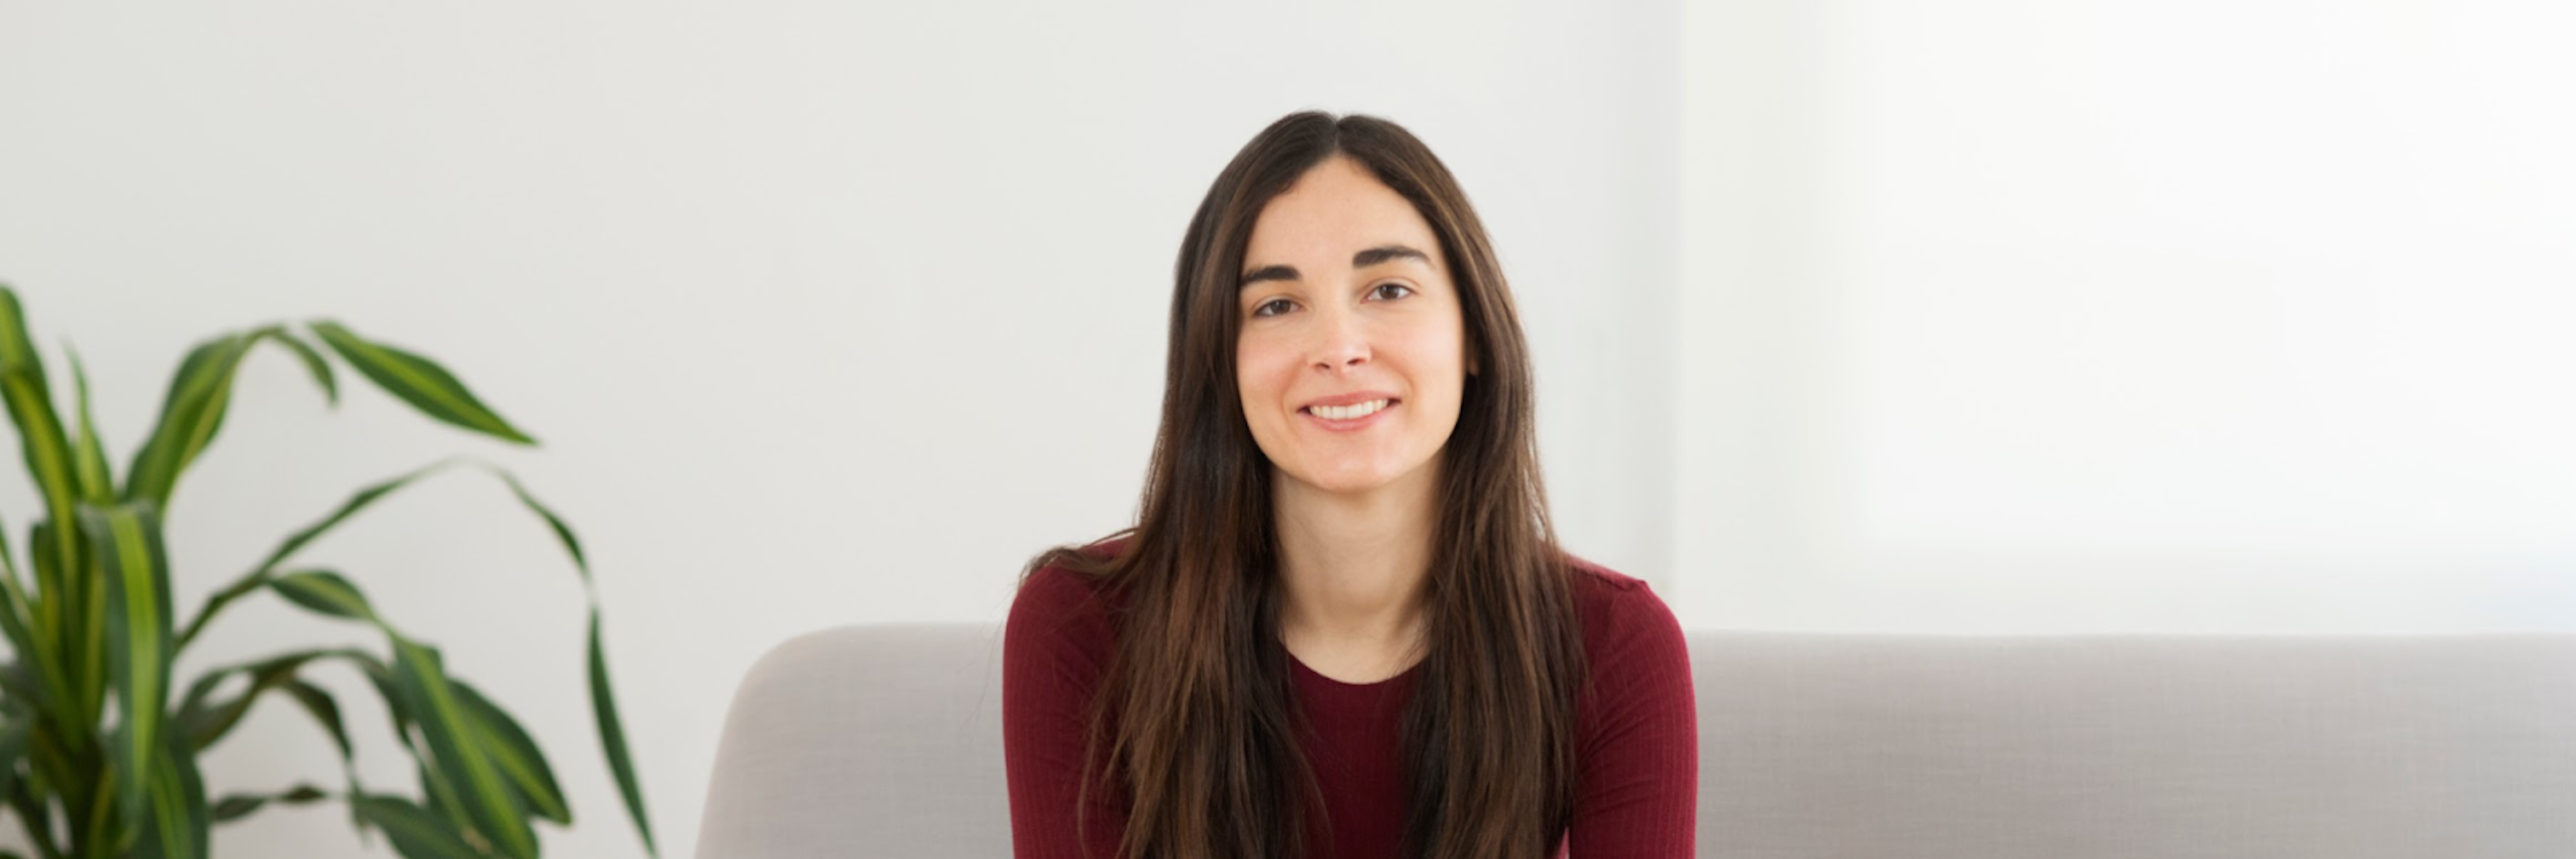 An image of Andrea Oliver Garcia, who founded Emjoy in 2018.